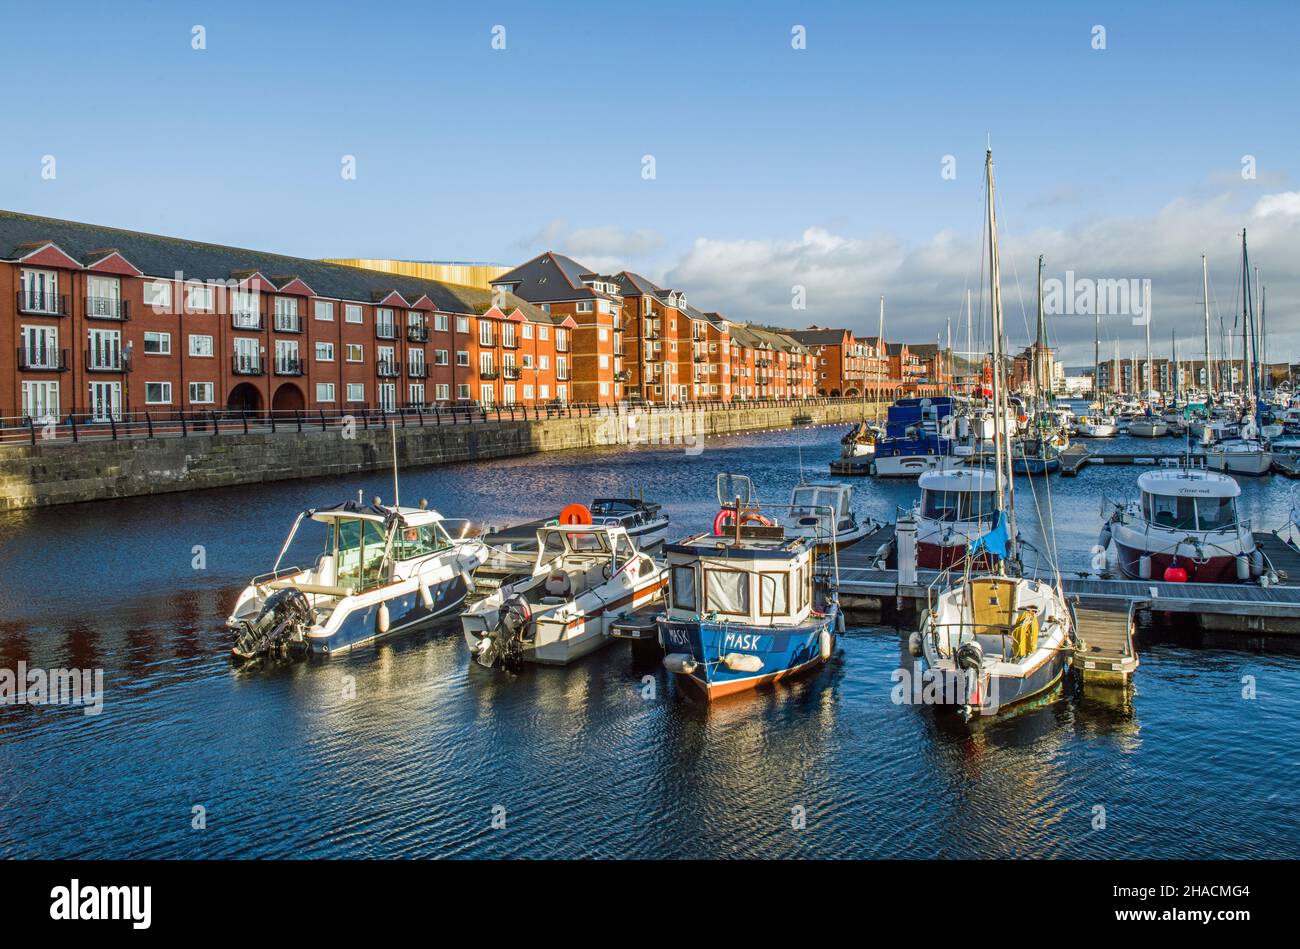 The inner of the marinas at Swansea showing moored boats and apartments Stock Photo